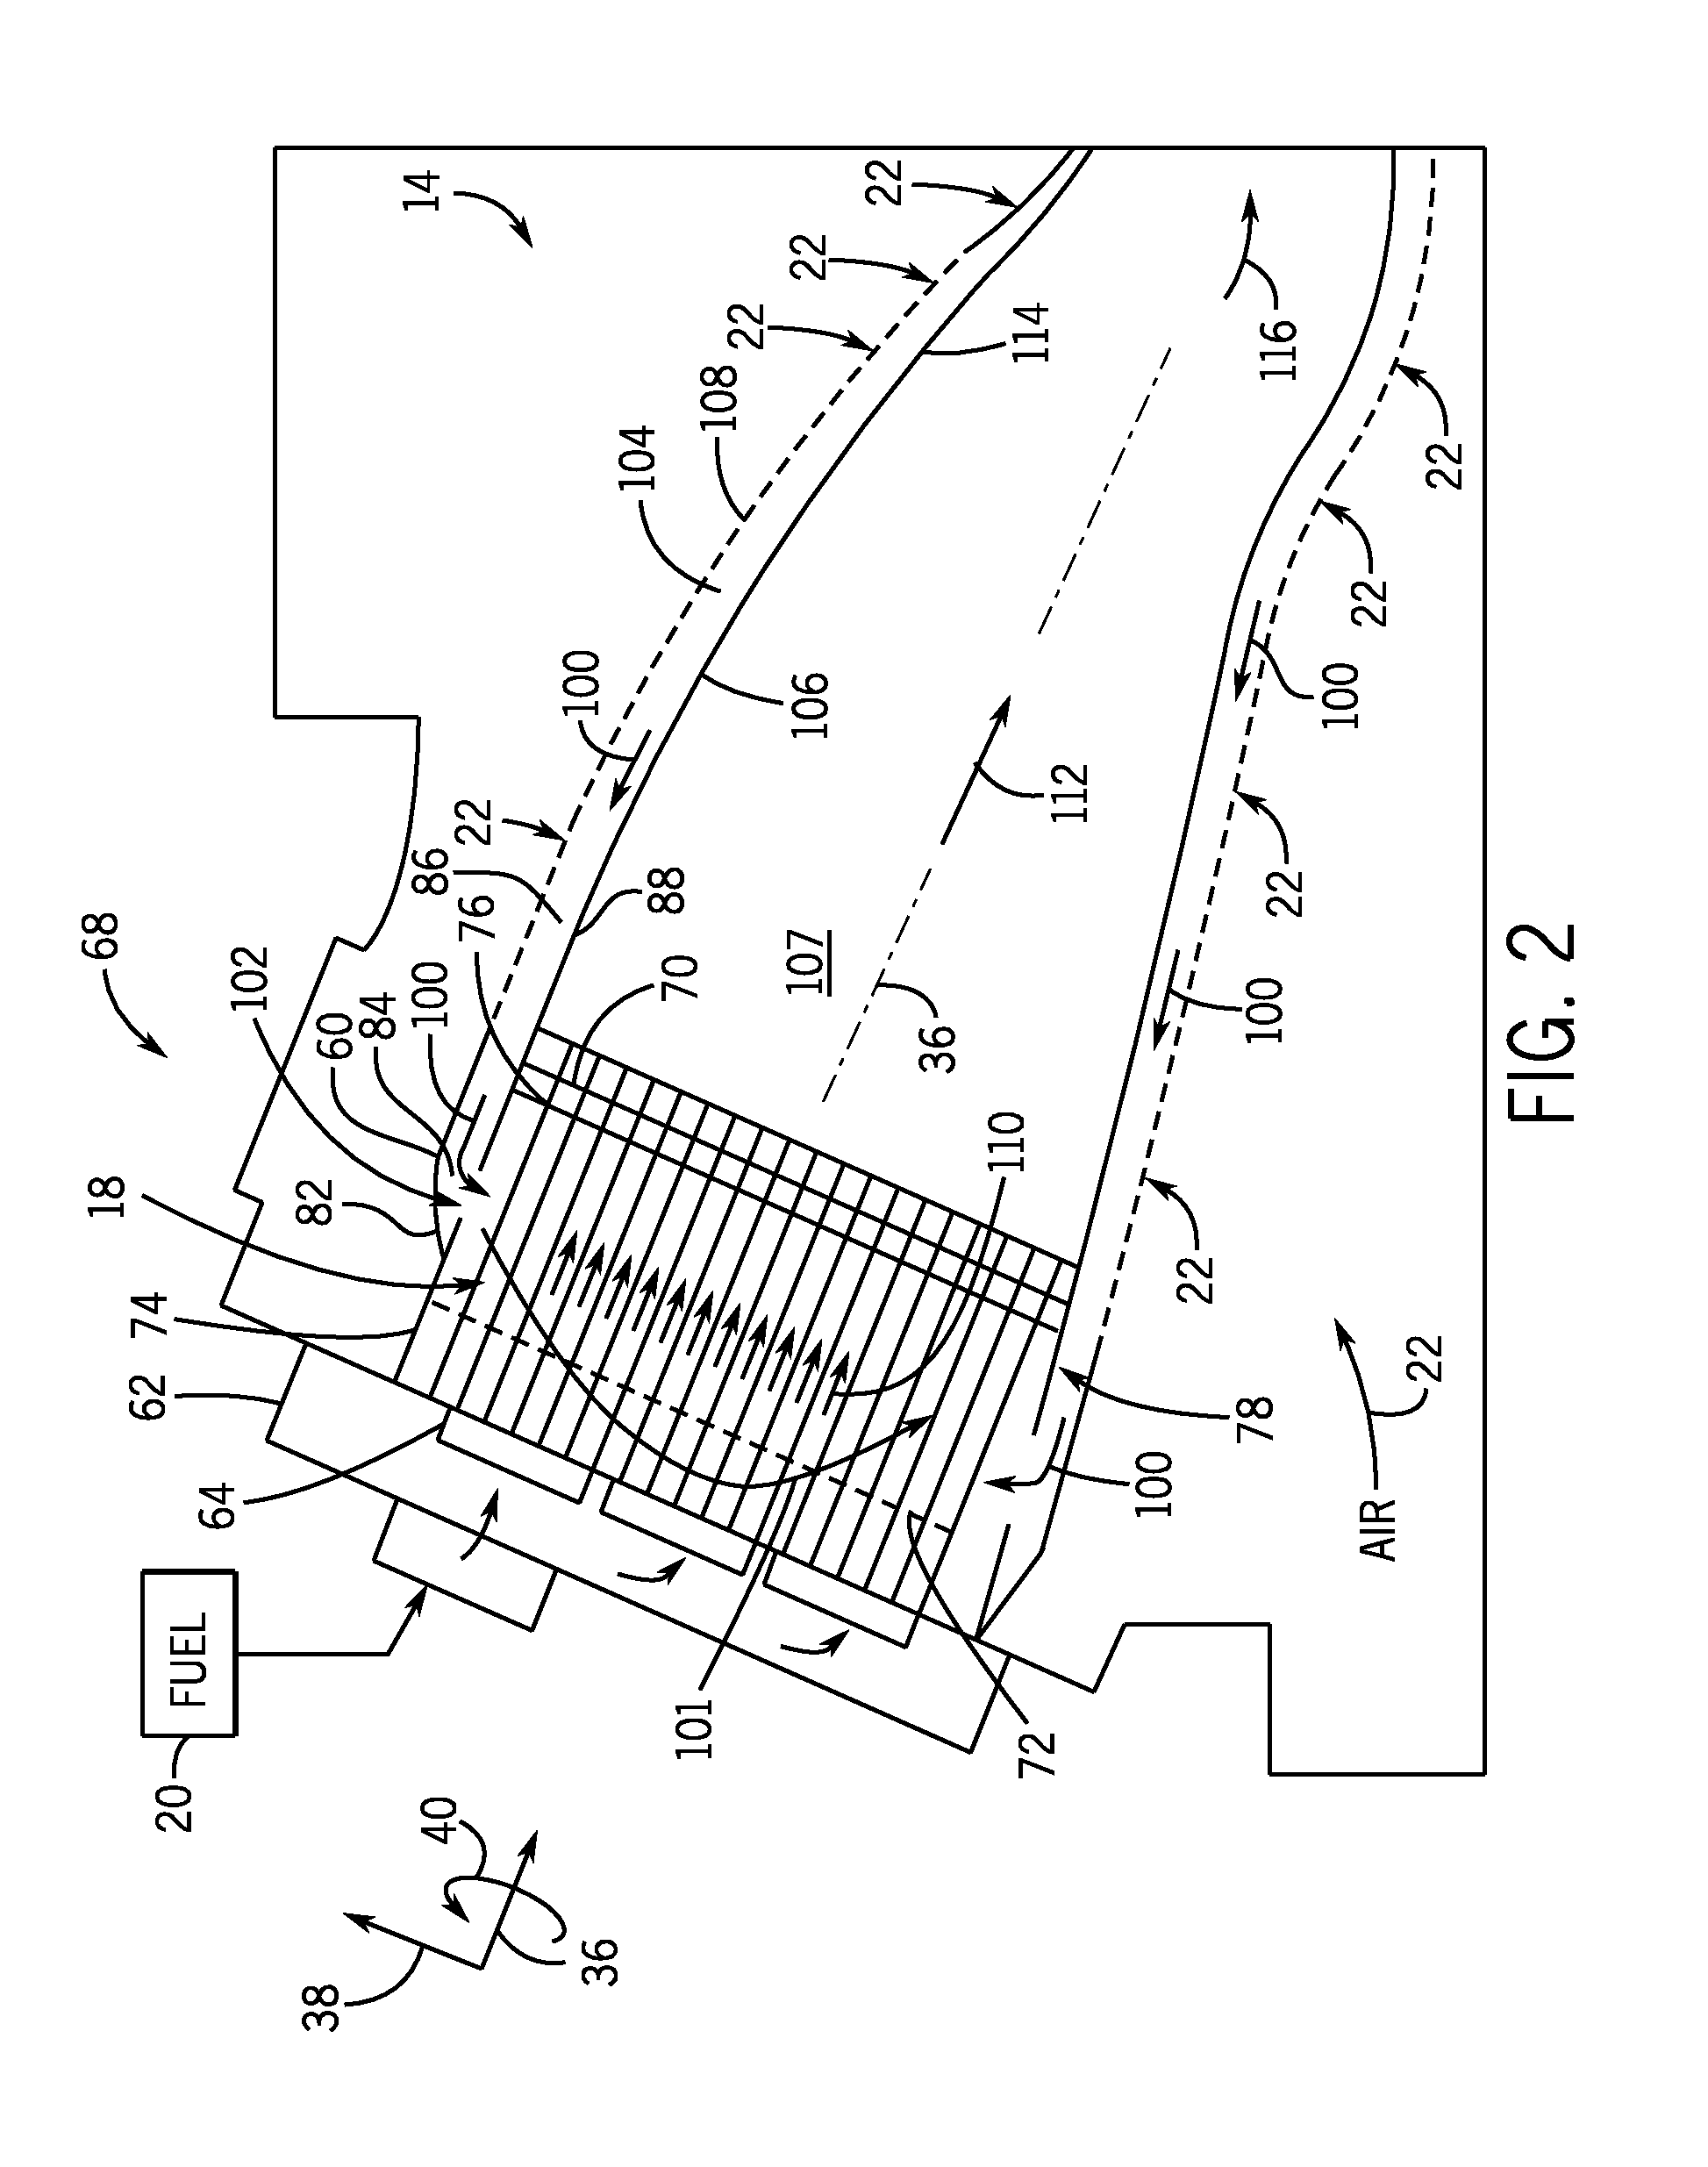 Air diffuser for combustor